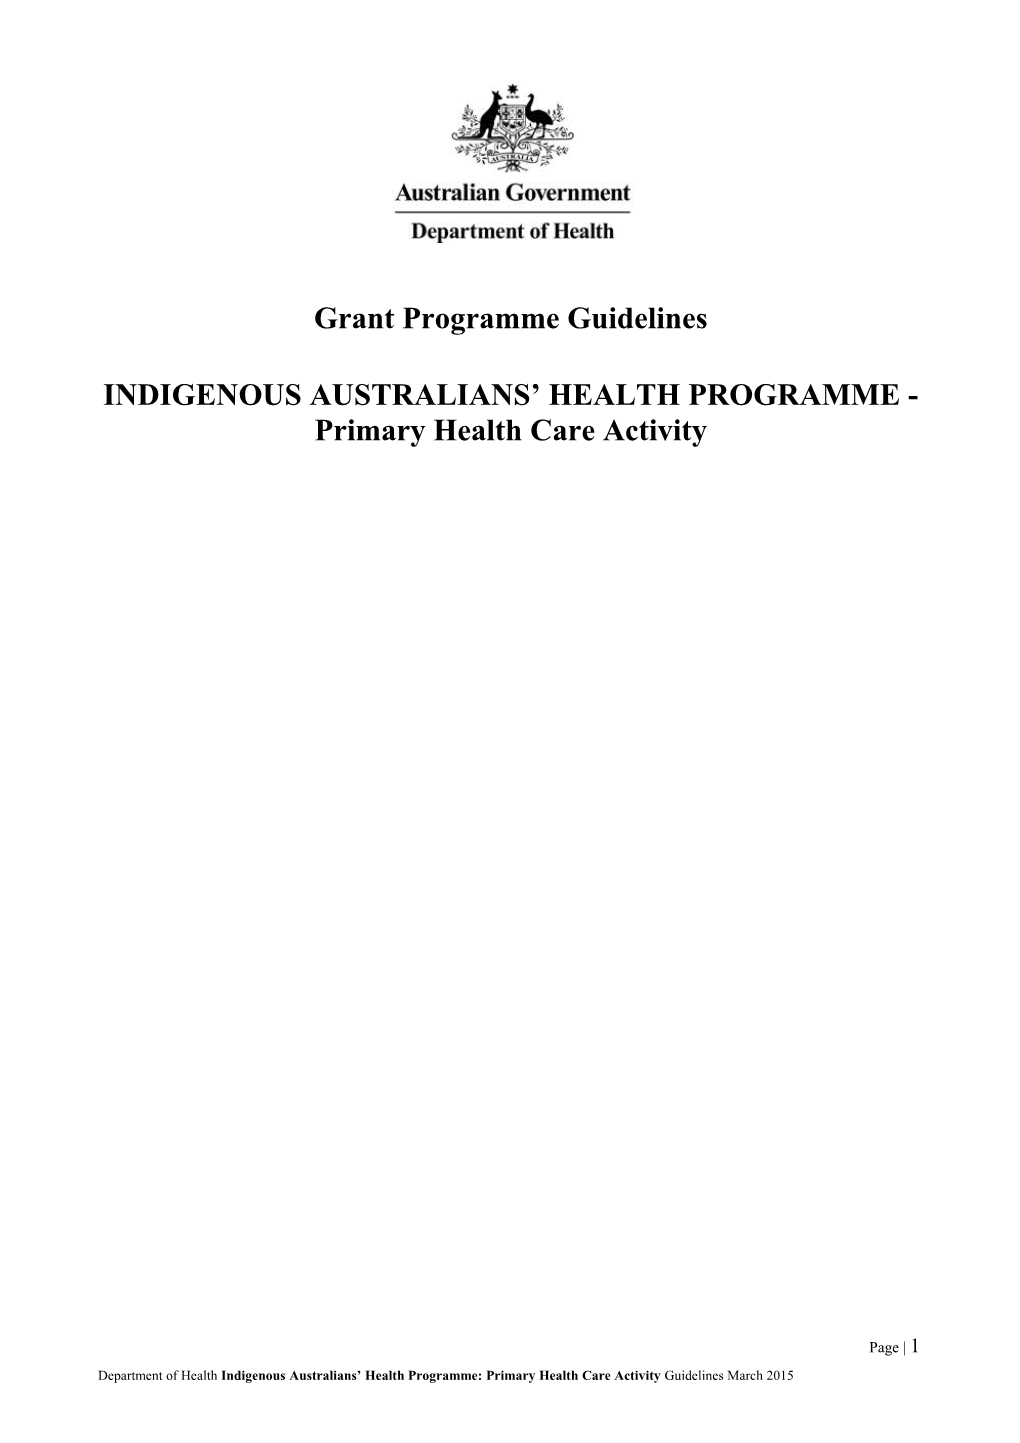 Grant Programme Guide, Indigenous Australians' Health Programme, Primary Health Care Activity